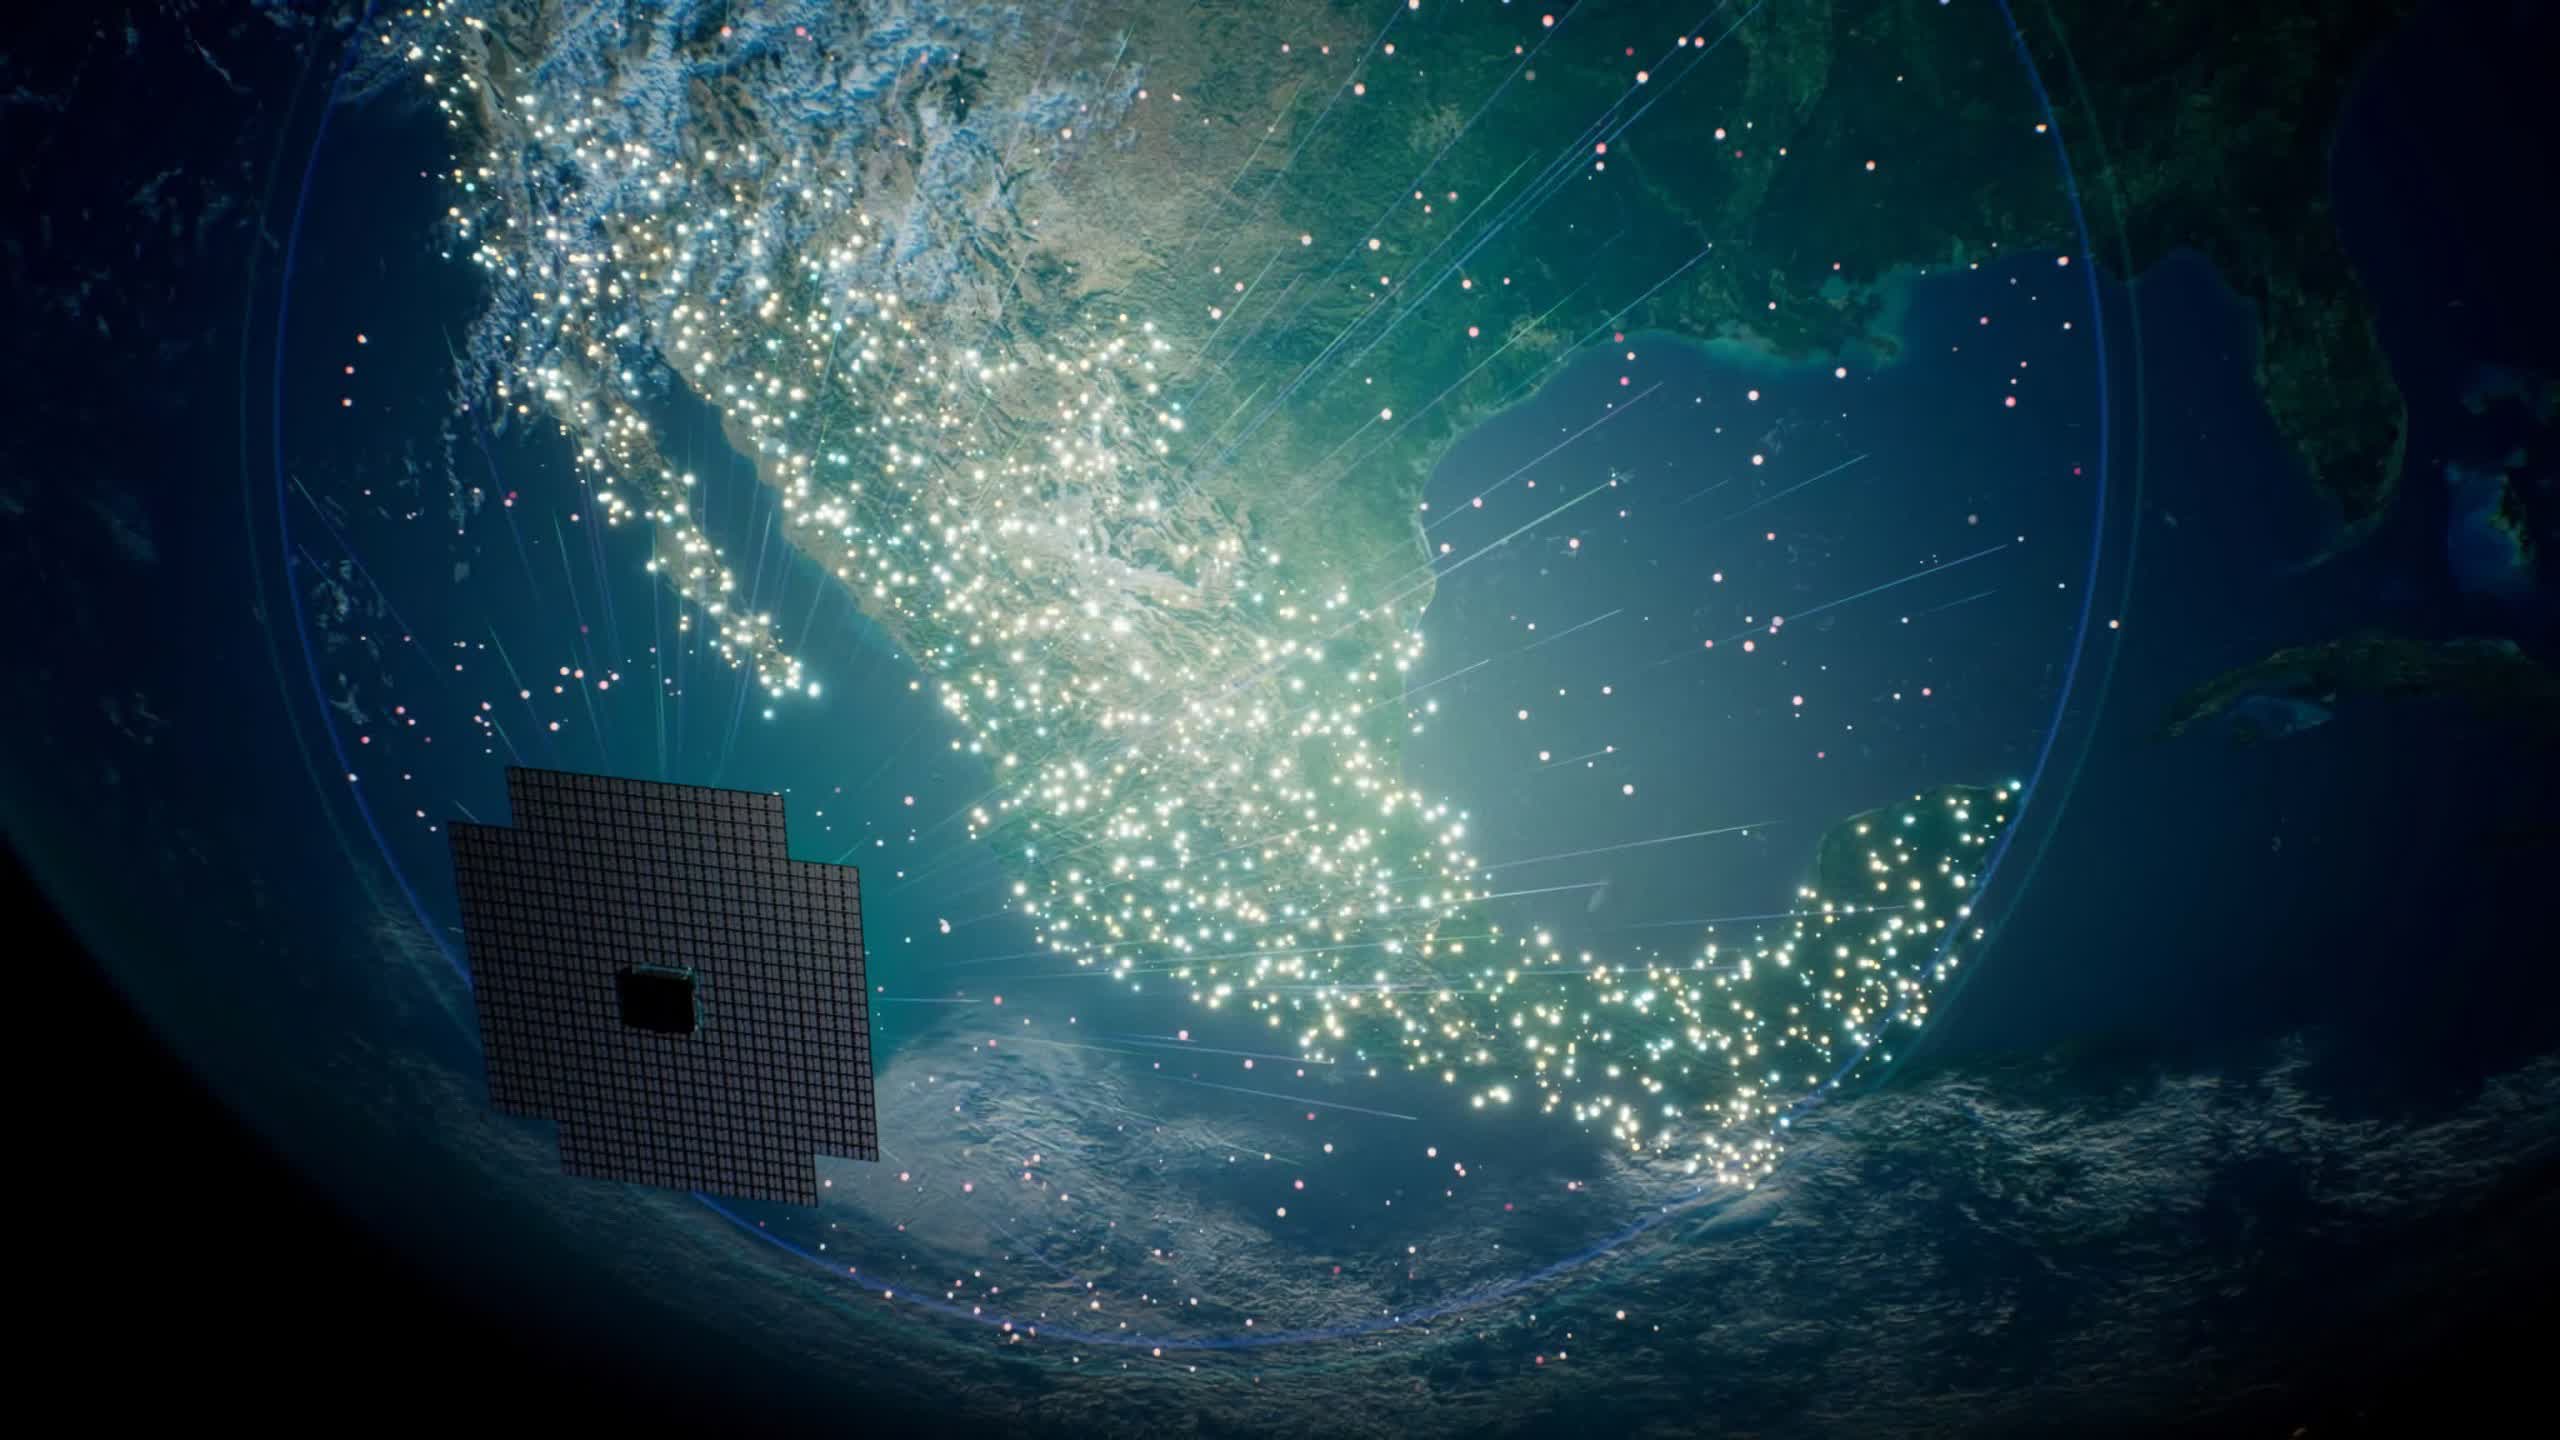 AT&T and comsat partner complete the first satellite 'direct-to-smartphone' call